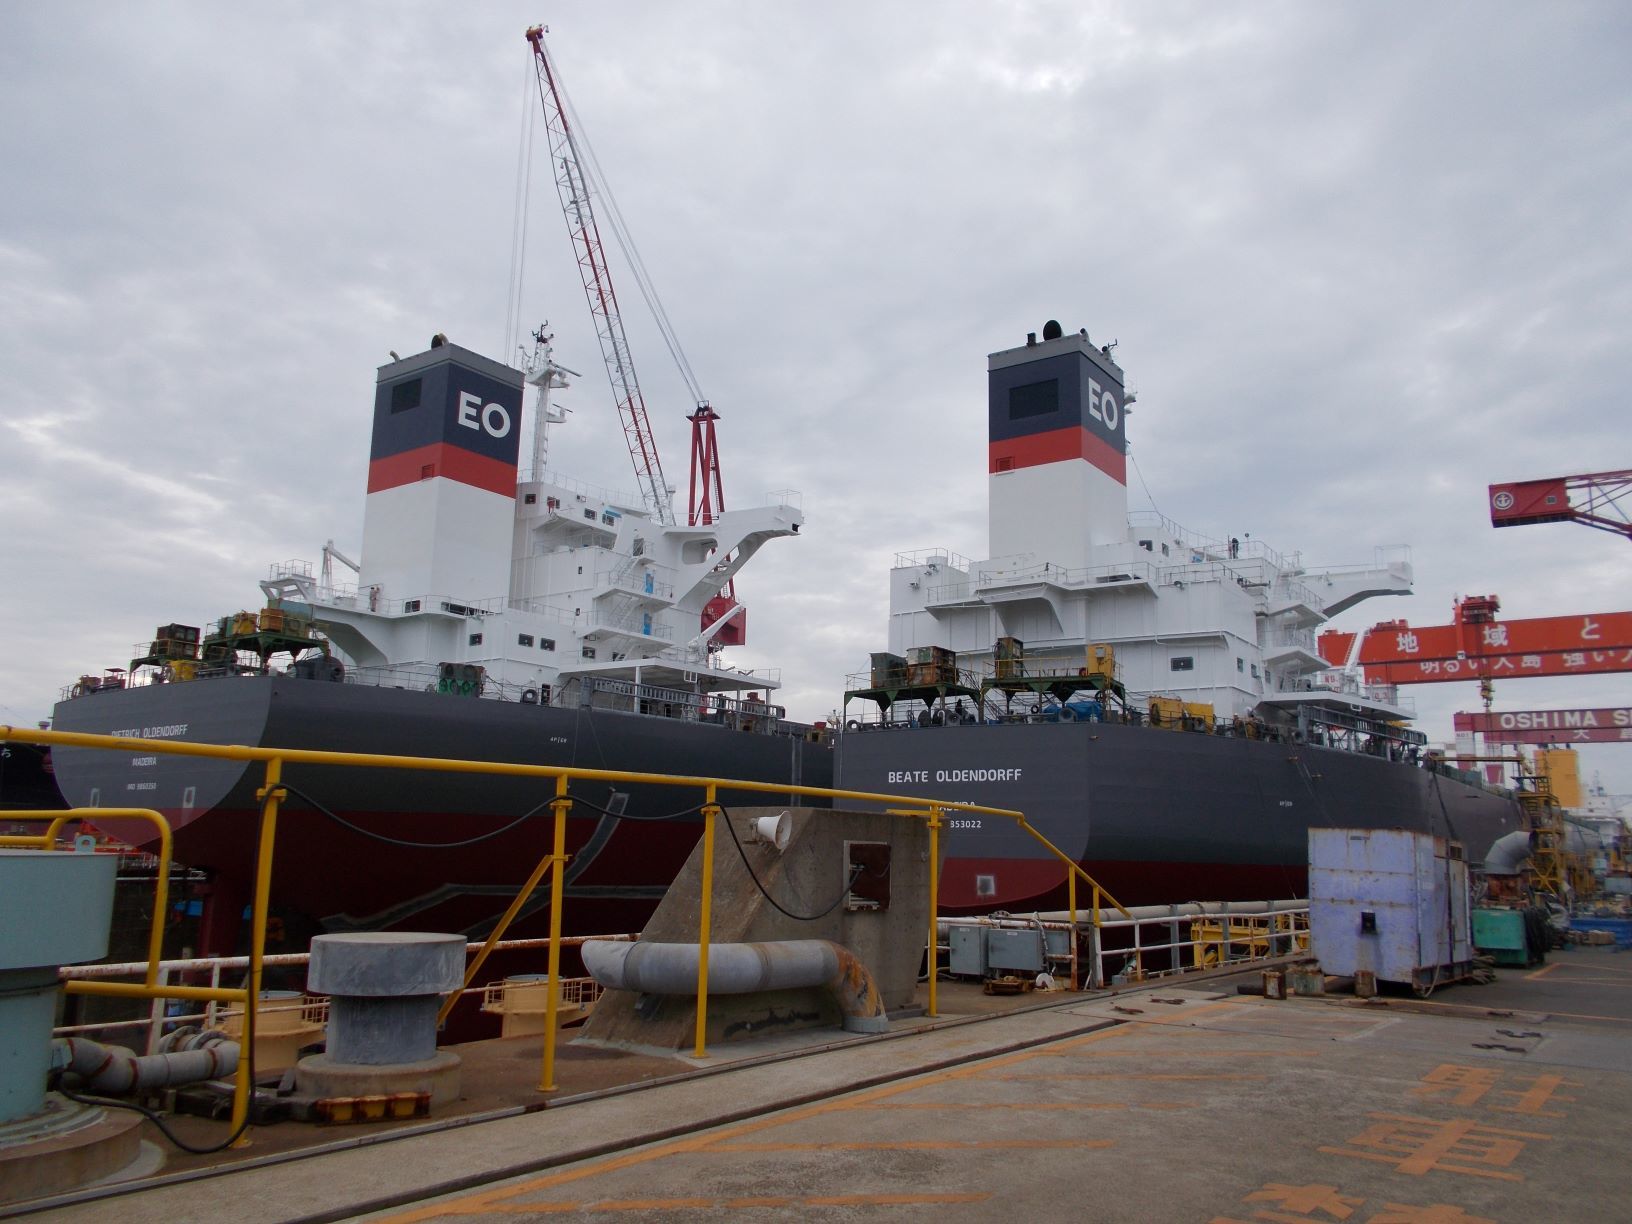 Oldendorff plans four namegivings in March 2020 at Oshima, Japan